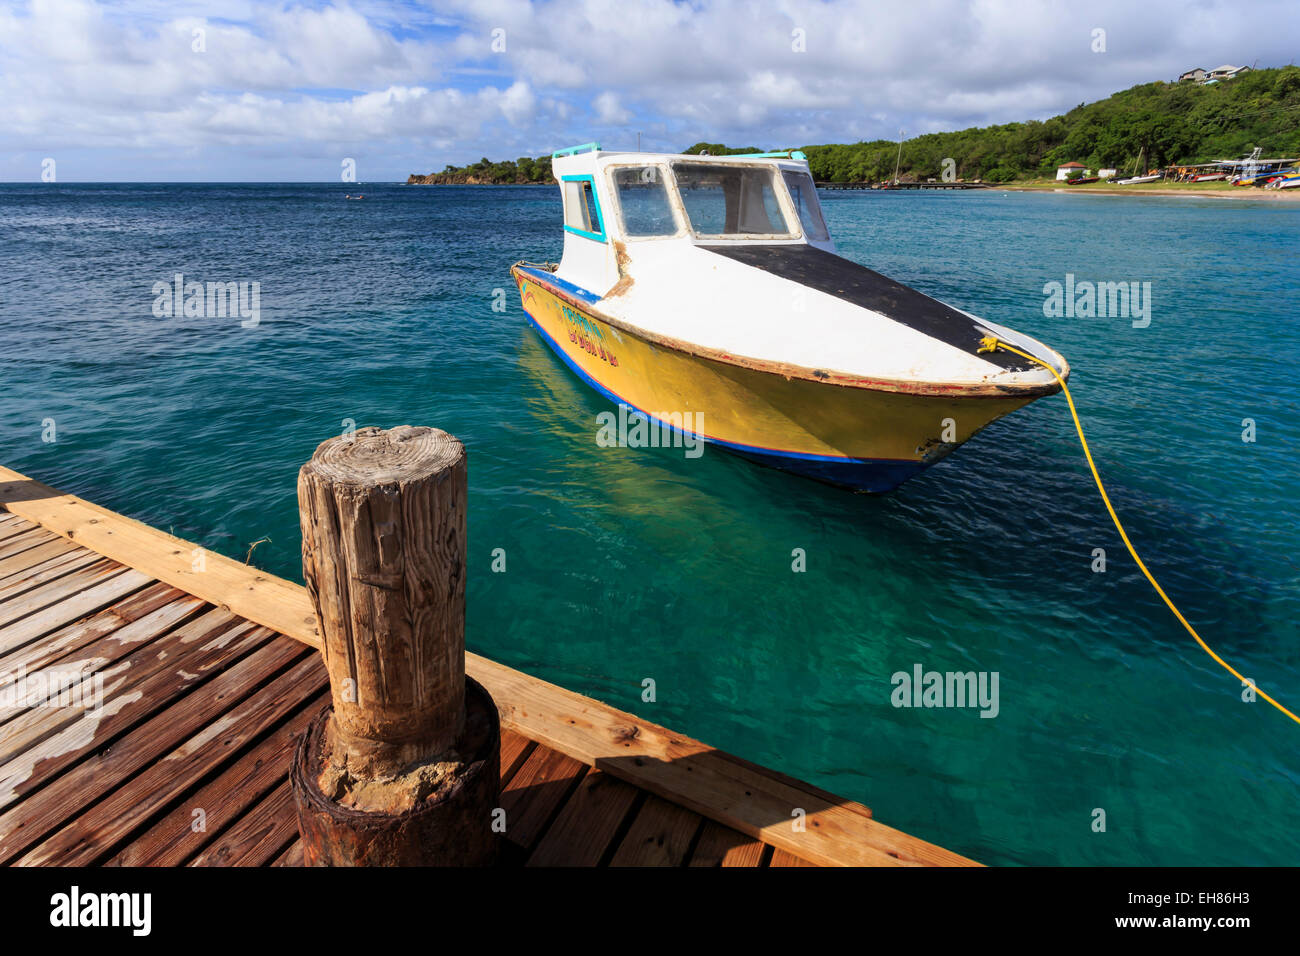 Small boat and jetty, Saline Bay, Mayreau, Grenadines of St. Vincent, Windward Islands, West Indies, Caribbean, Central America Stock Photo